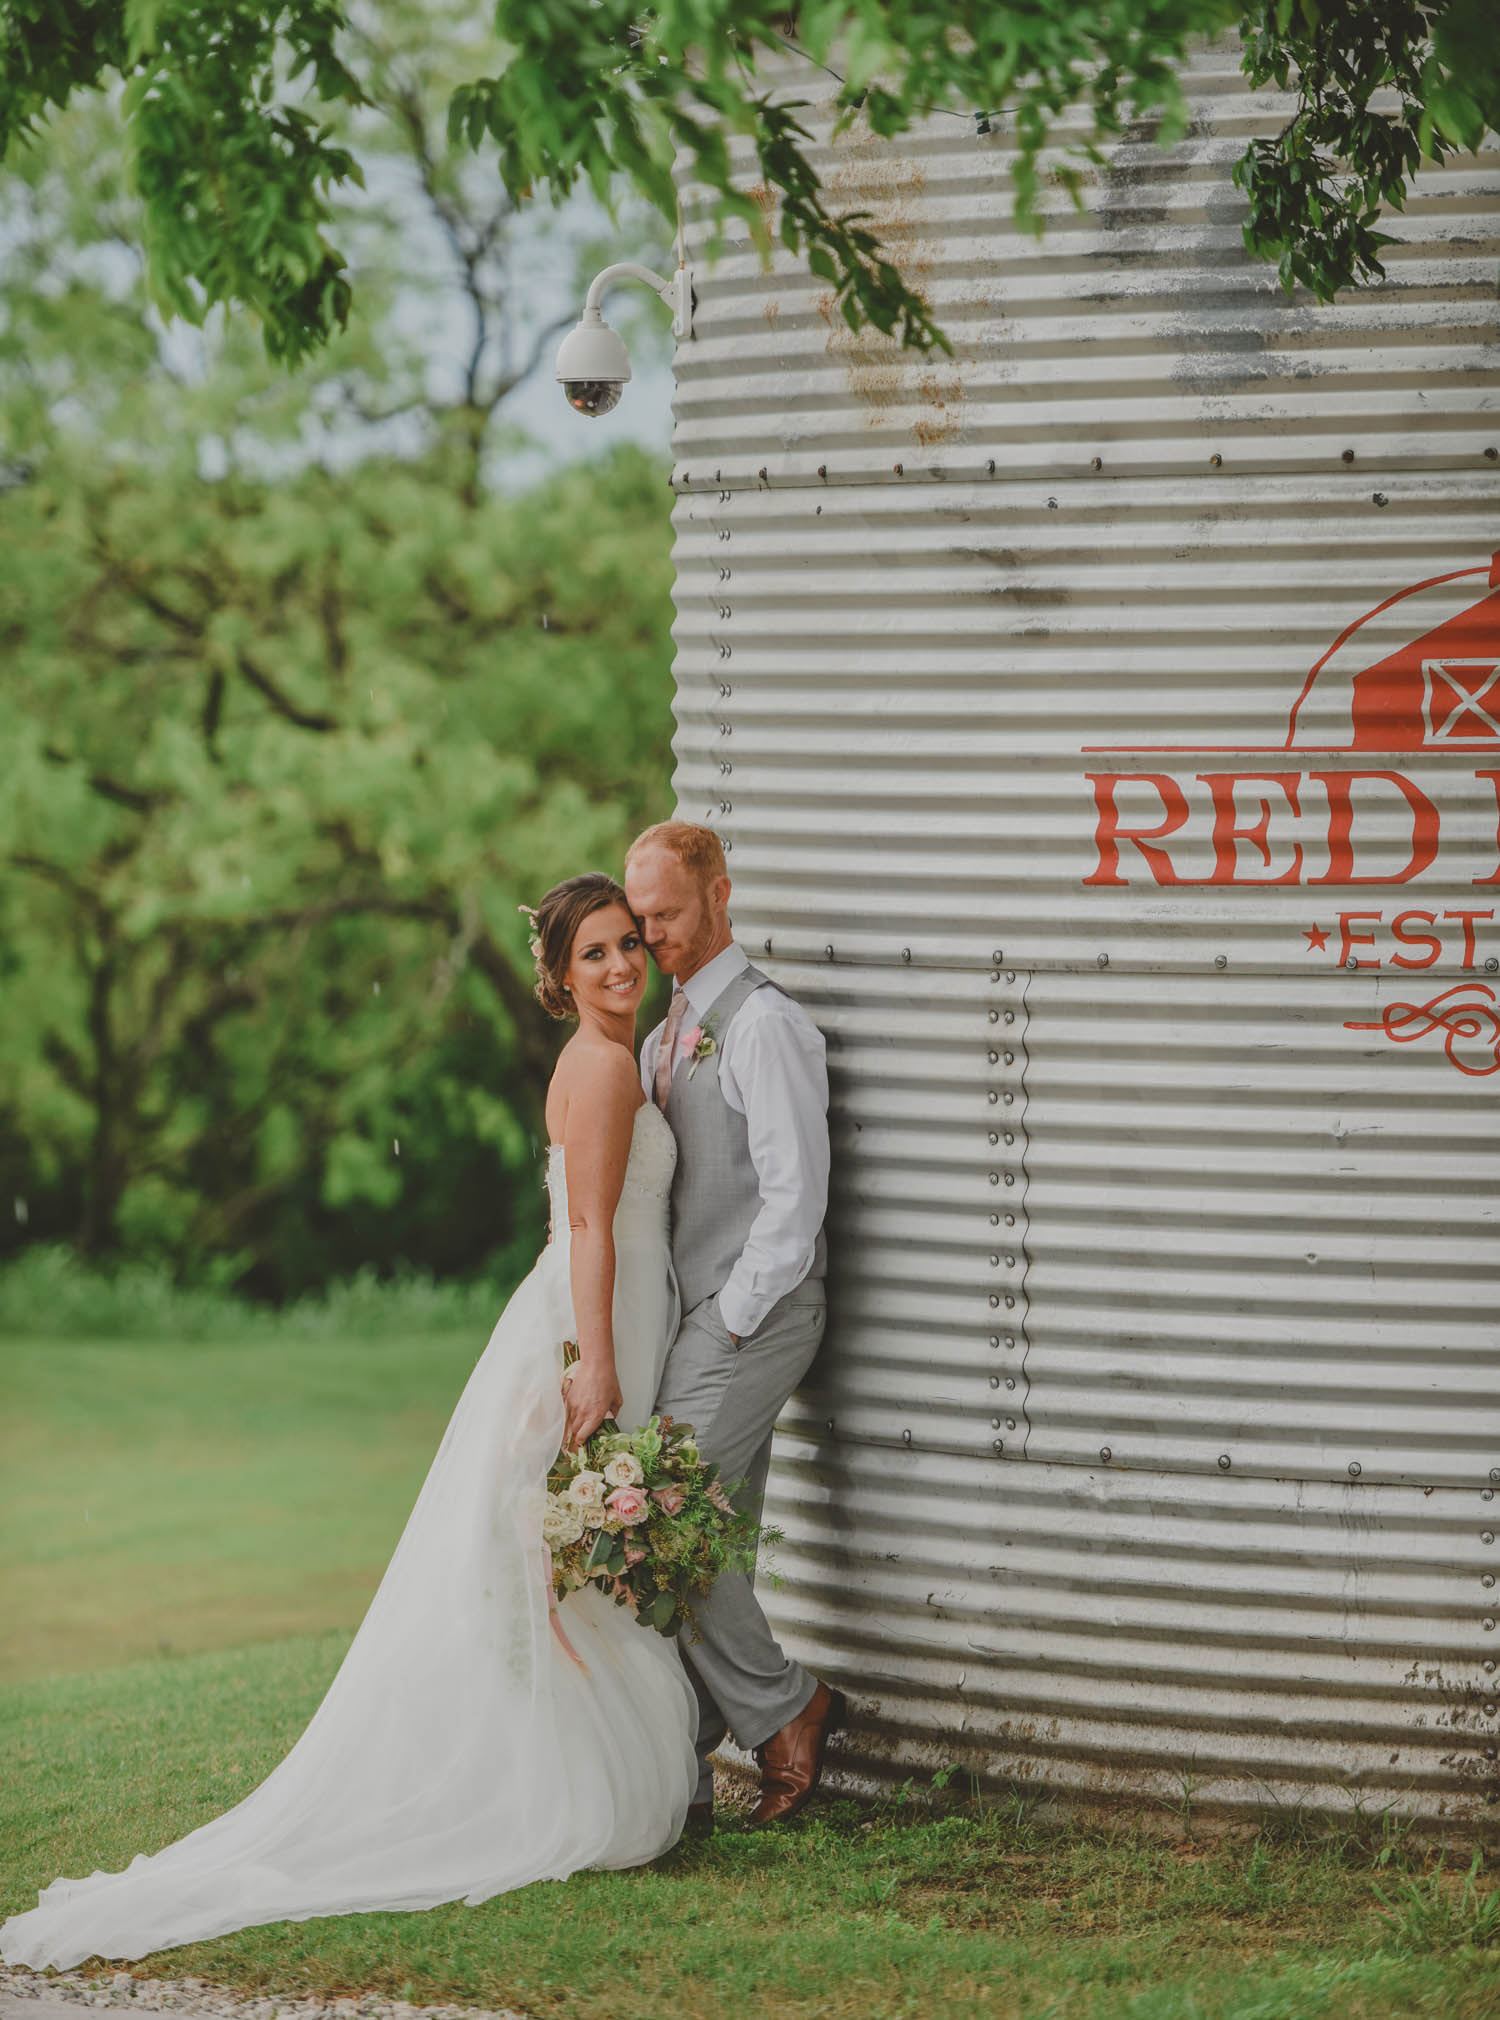 Red Barn Events - 1